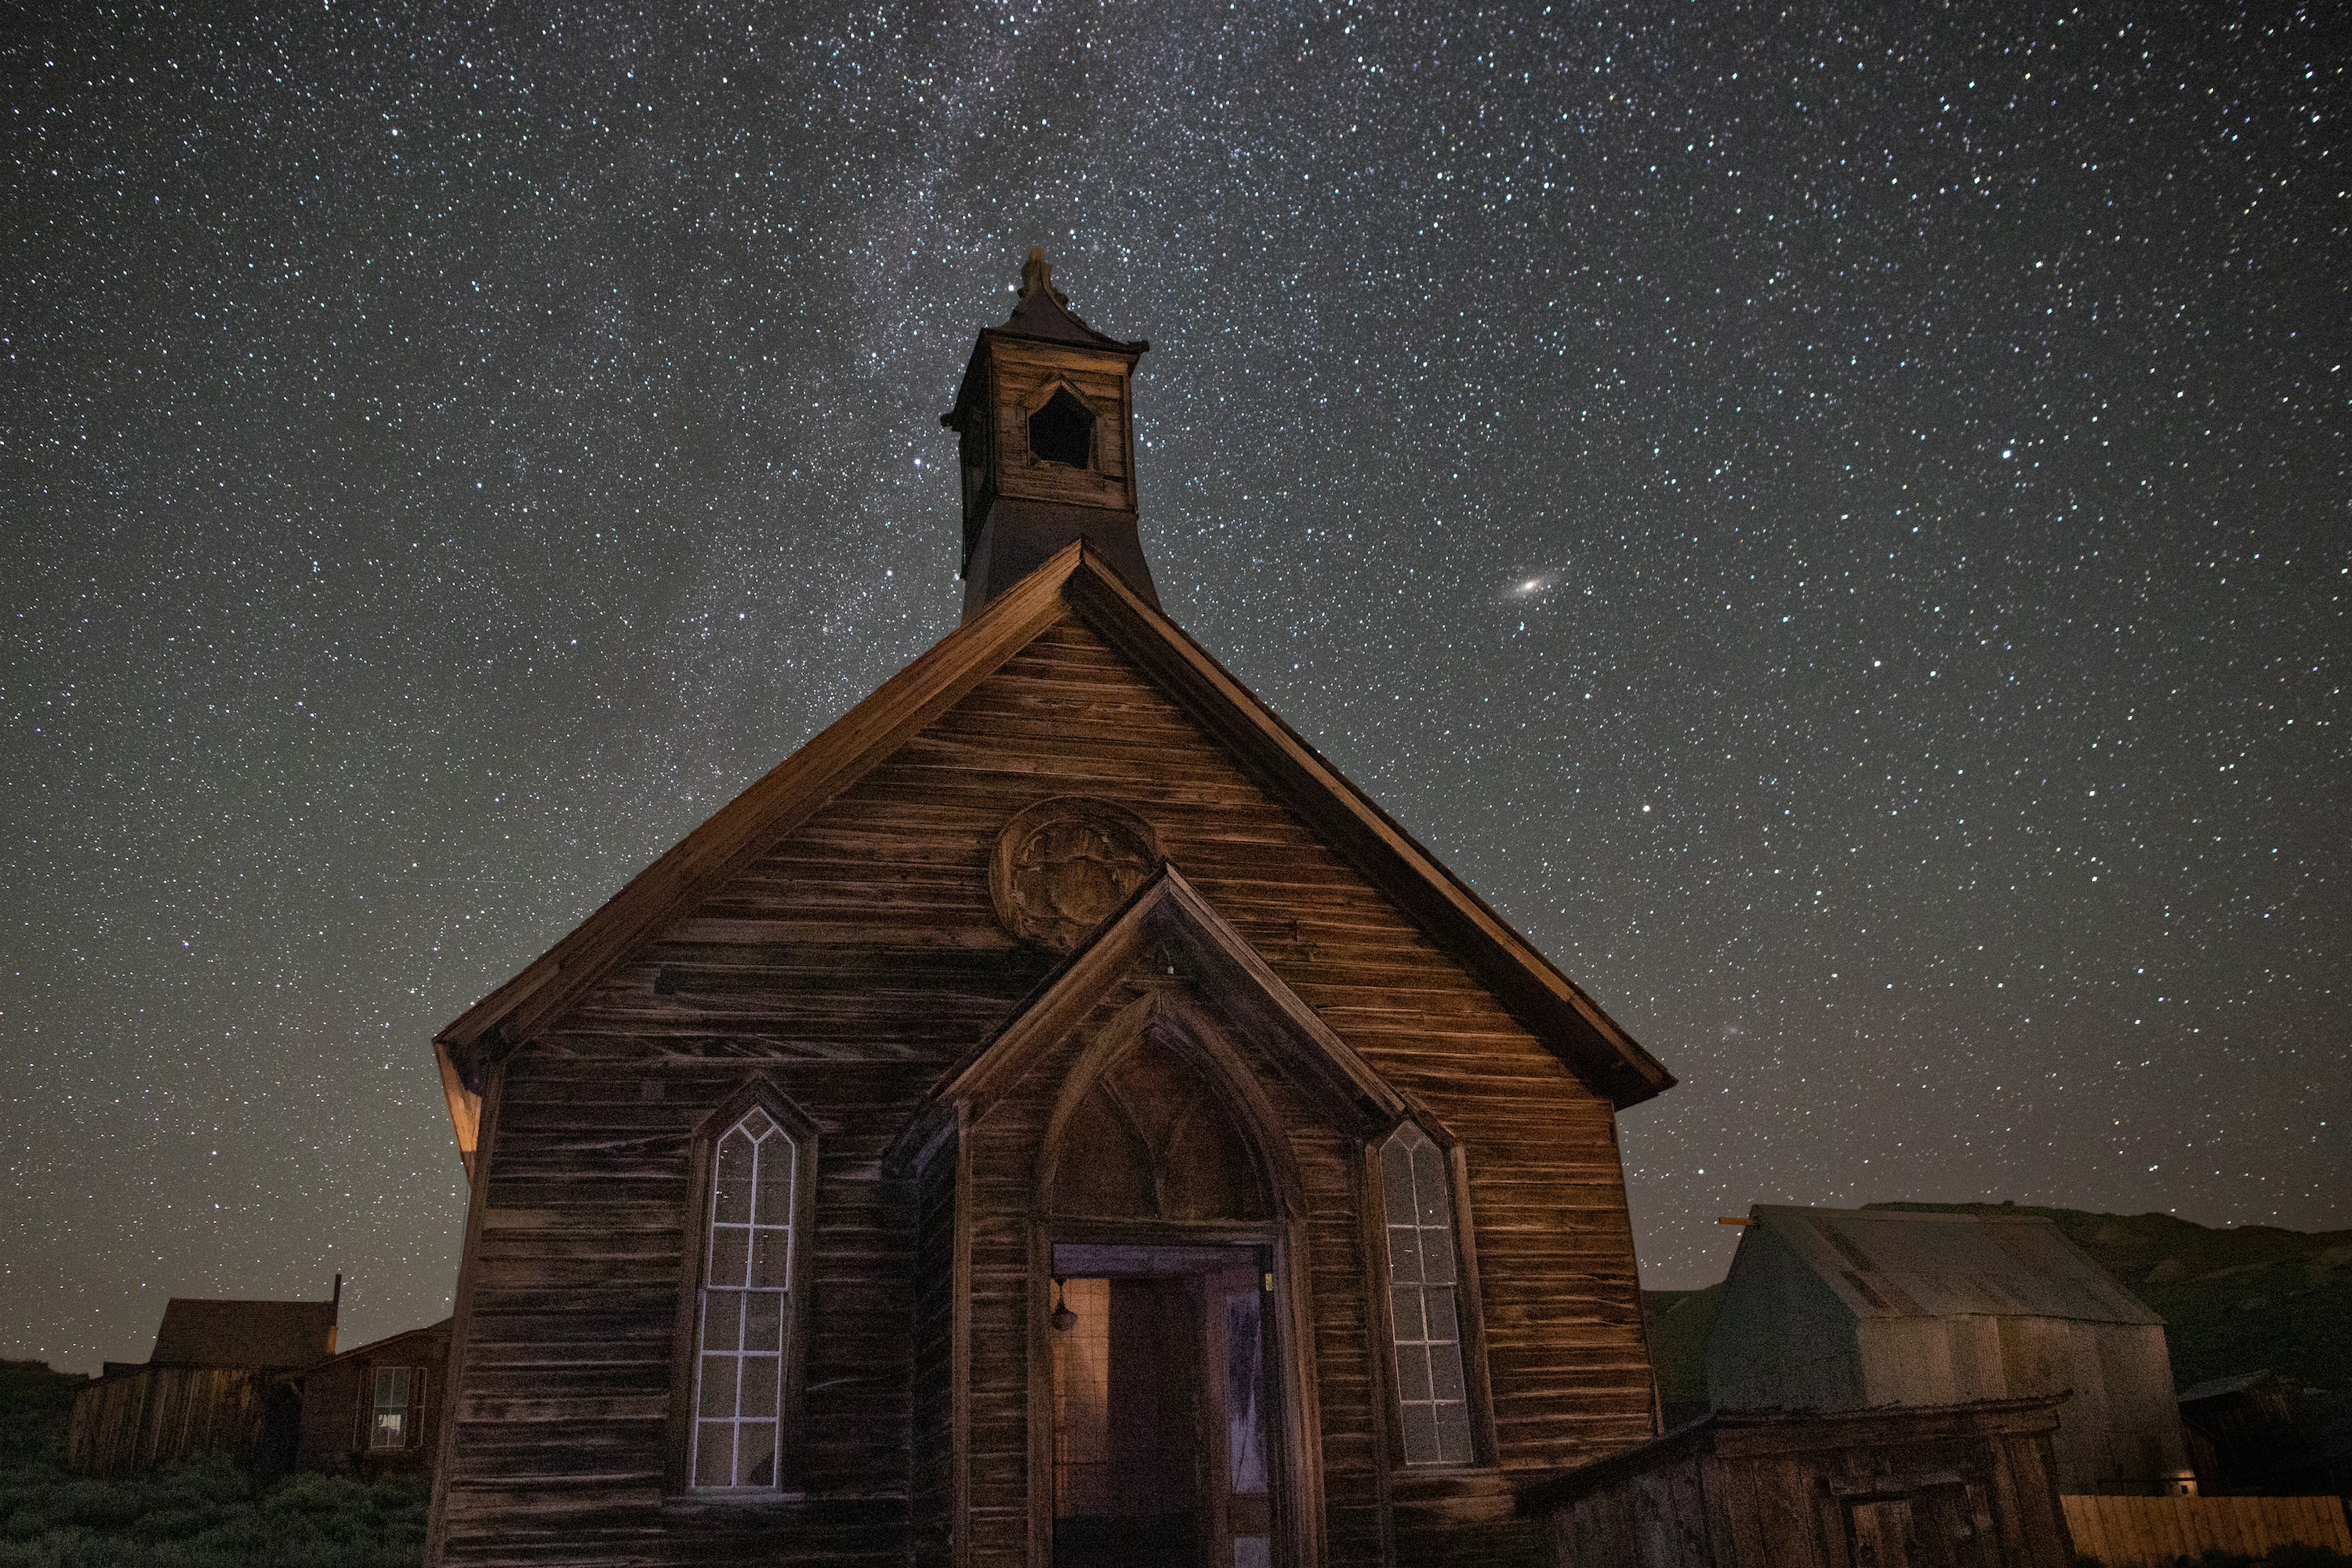 an old wooden church at night under a starry sky